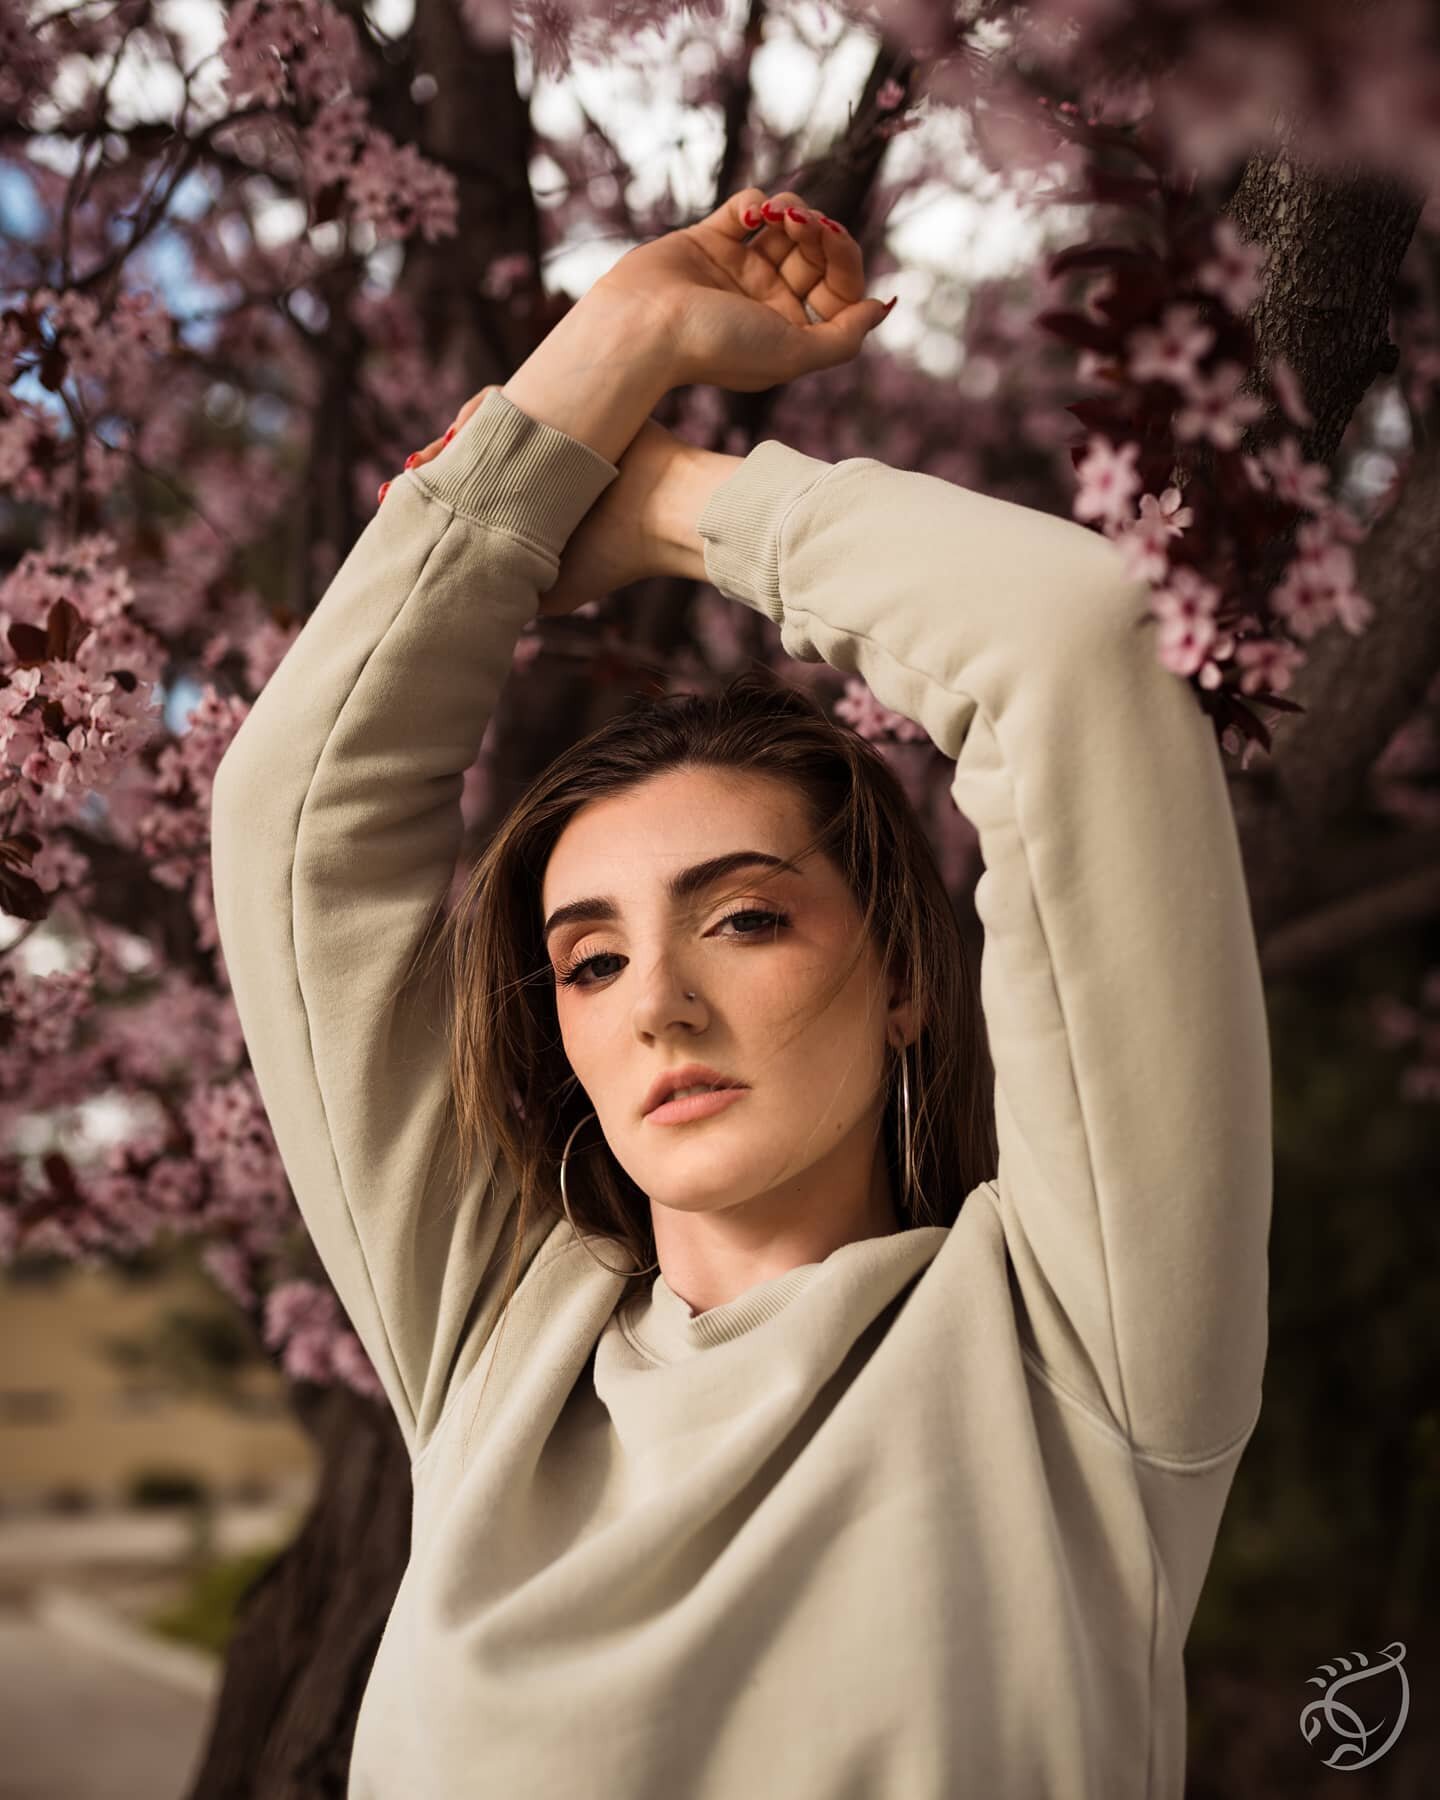 🌸𝓢𝓹𝓻𝓲𝓷𝓰 𝓑𝓵𝓸𝓼𝓼𝓸𝓶𝓼 🌸
model: @bubblygold_
makeup: @kasshakk

💮𝓟𝓻𝓸𝓶𝓸 𝓢𝓮𝓼𝓼𝓲𝓸𝓷𝓼💮
&bull; up to one hour shoot
&bull; online proof gallery for you to choose your favorites
&bull; includes 7 edited digitals
&bull; can be for hea